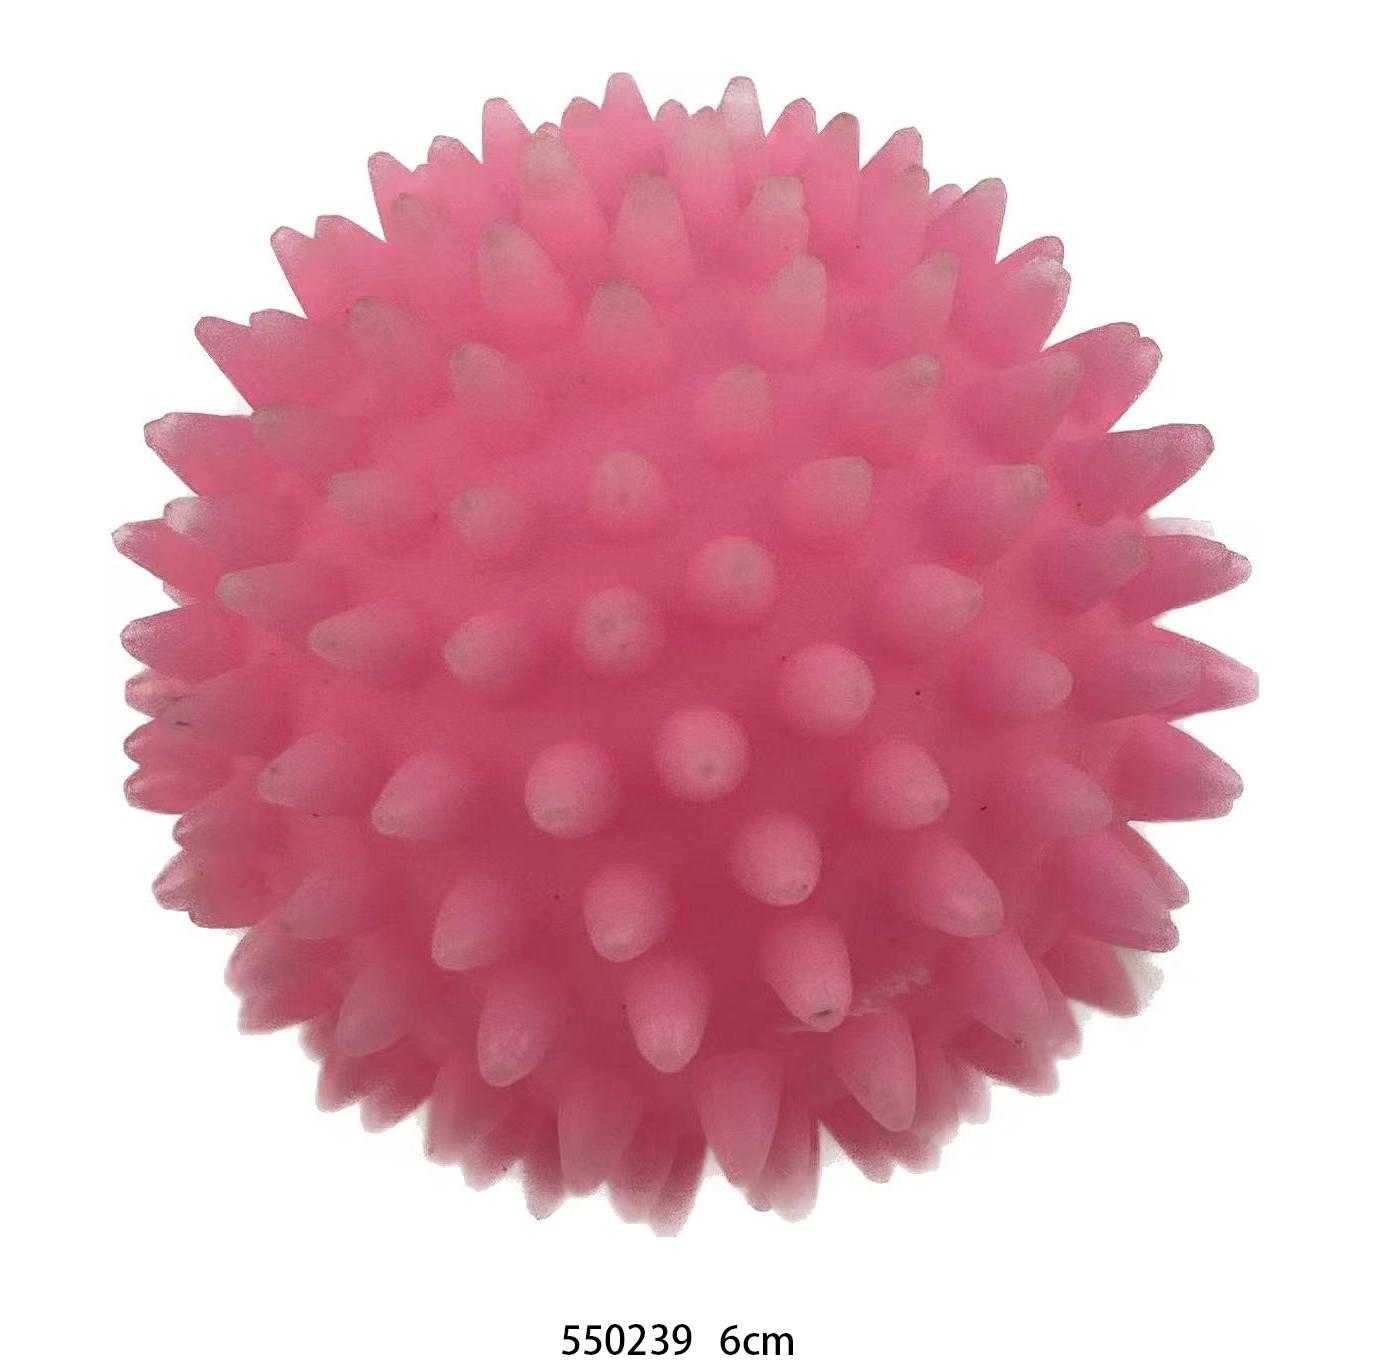 Chewing ball dog toy - 6cm - 550239